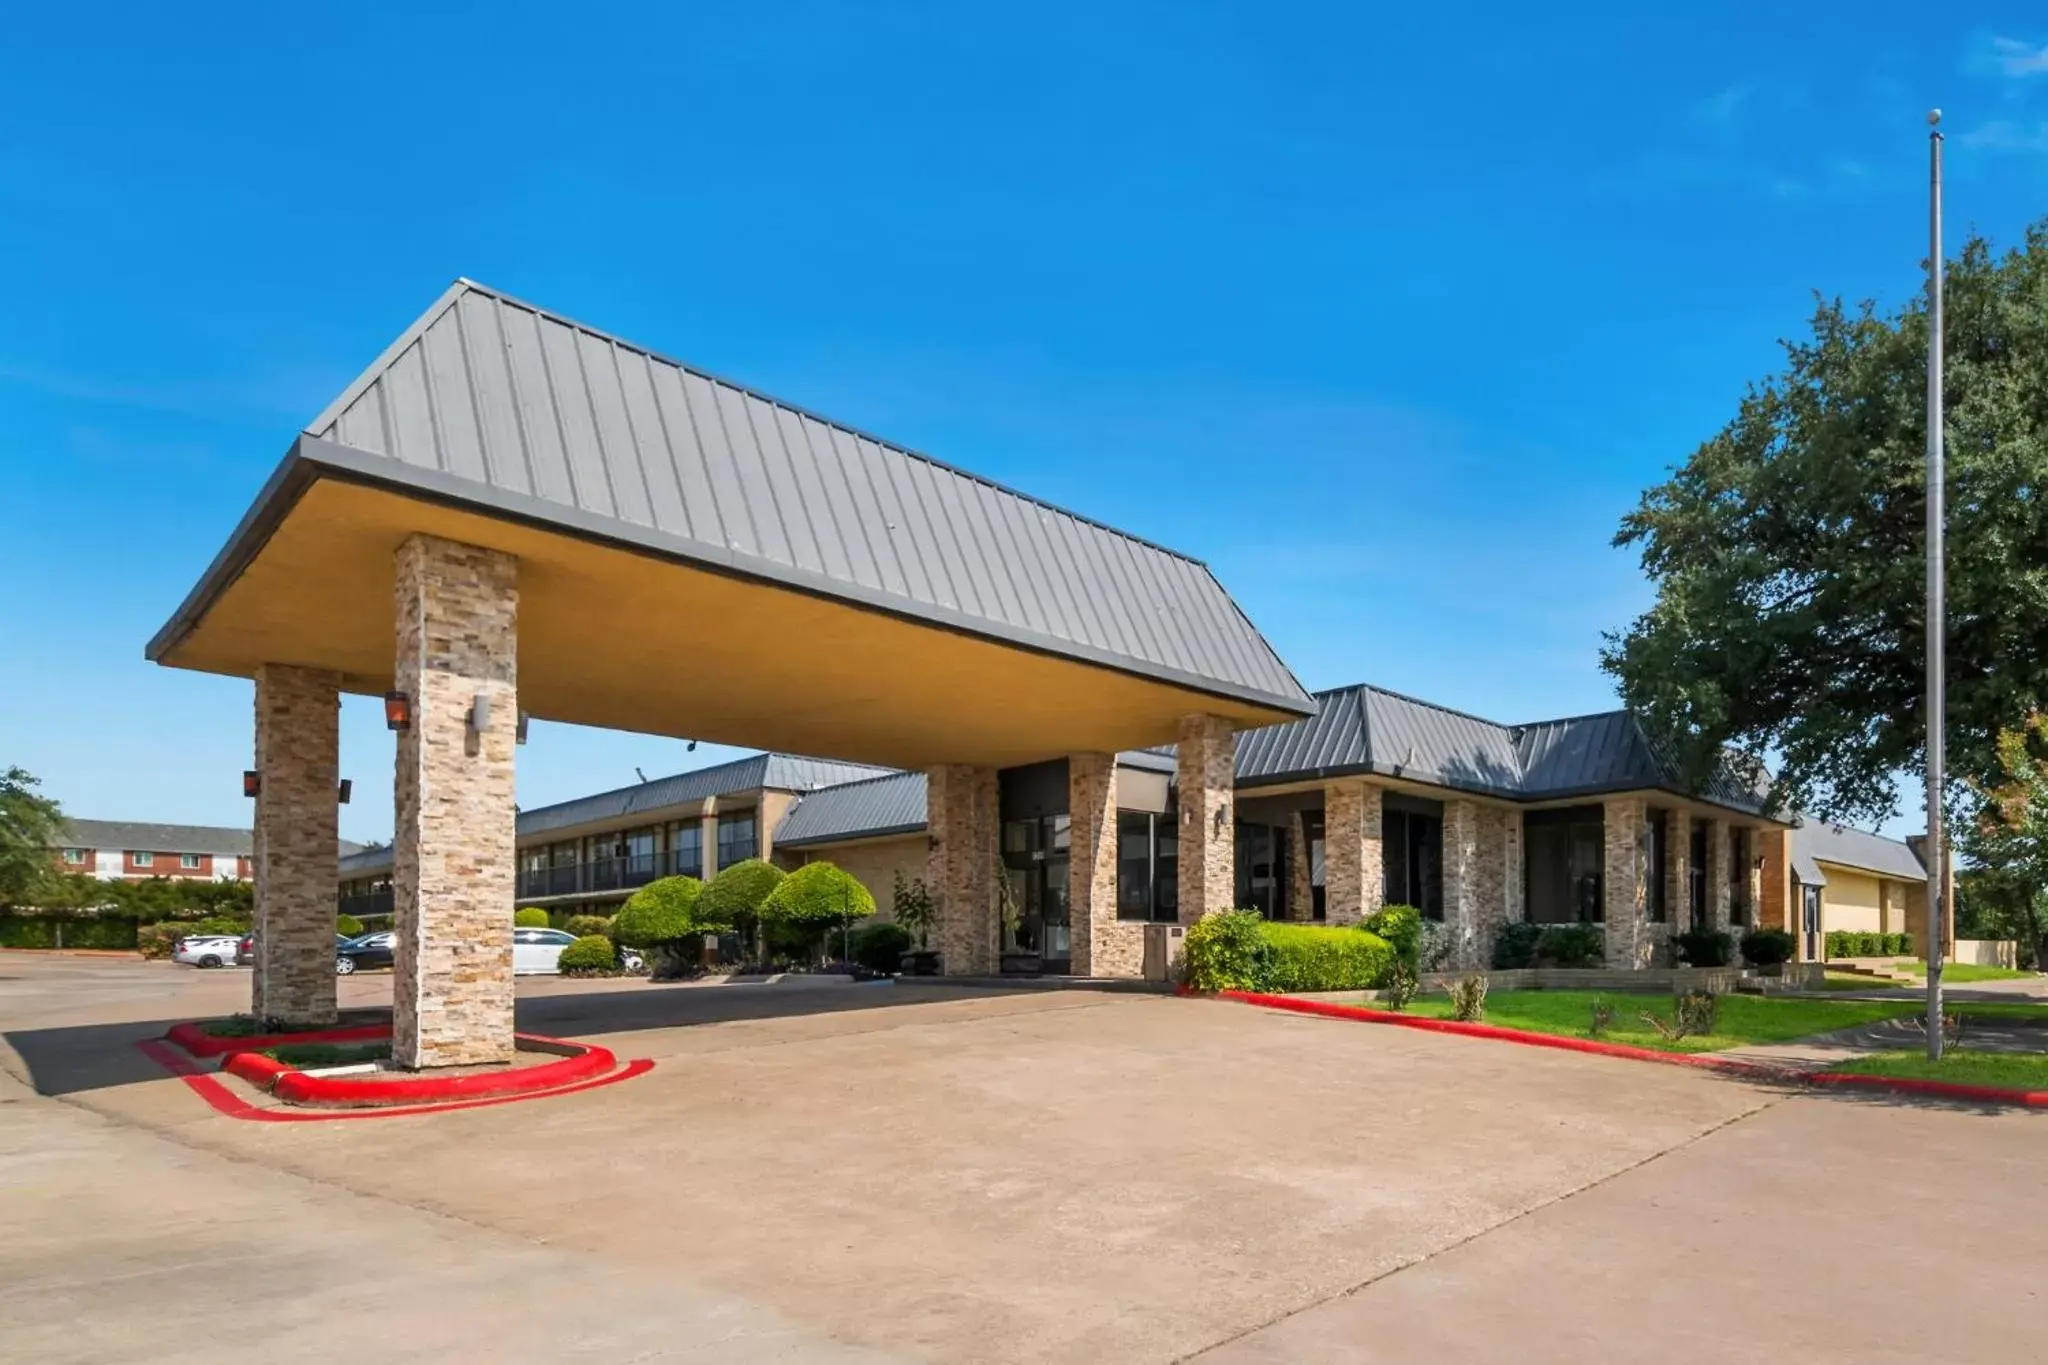 Property Building in Red Roof Inn & Conference Center McKinney